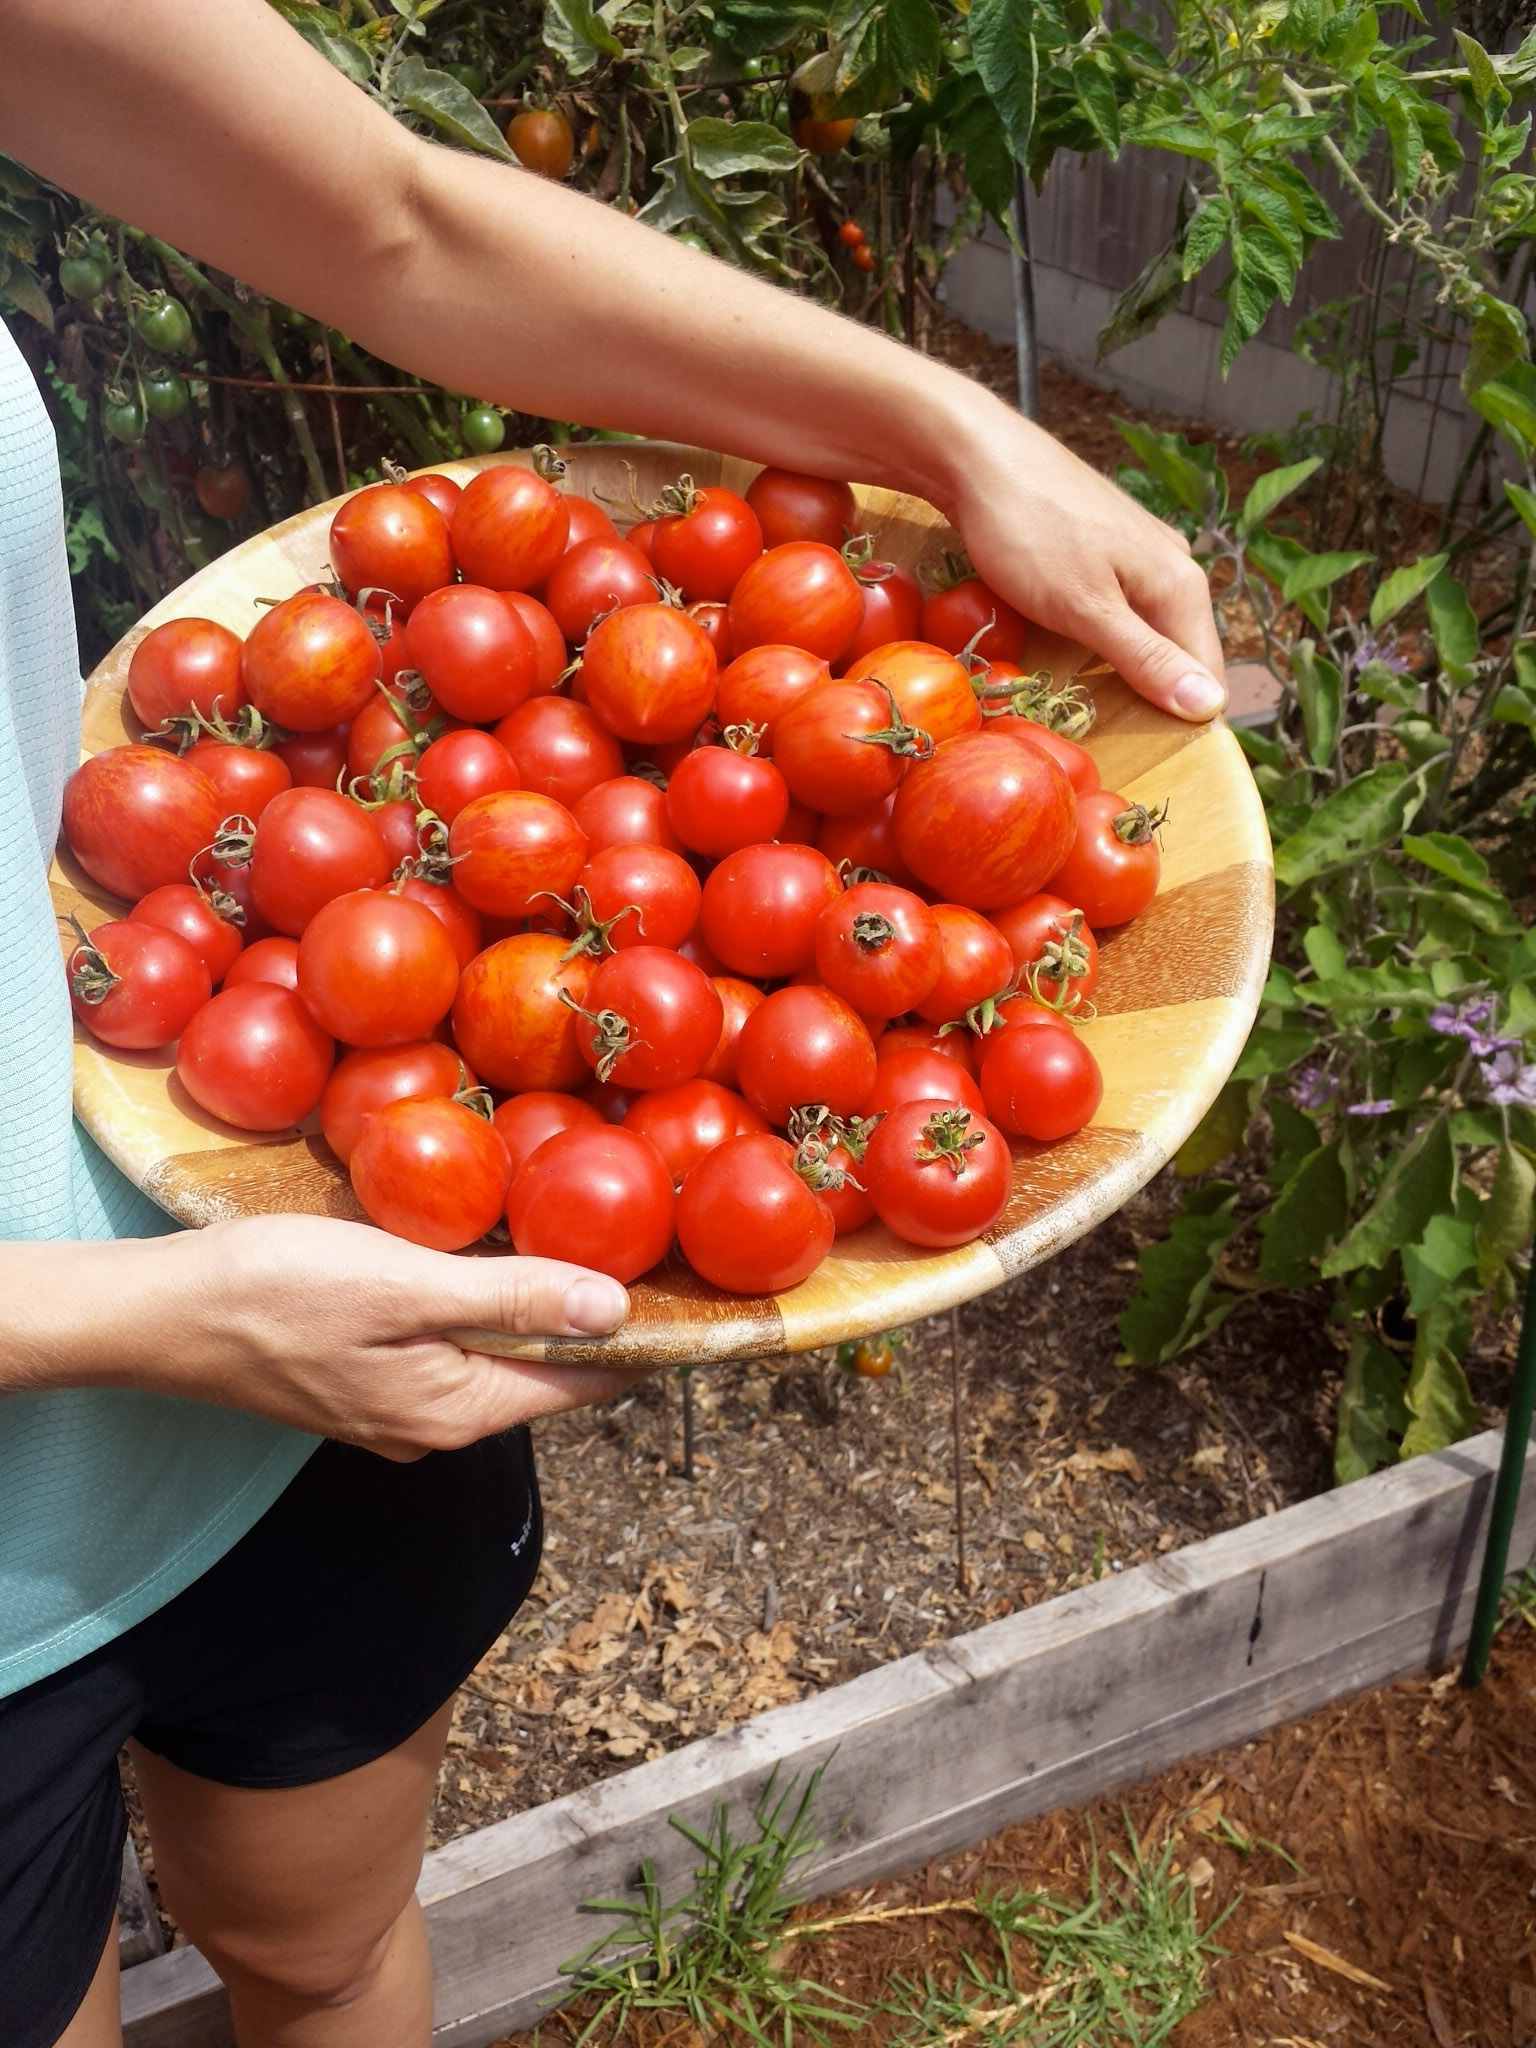 DeannaCat is holding a large wooden bowl supported by her hip as one would while holding a child. The bowl is full of red tinged tomatoes of small to medium size.